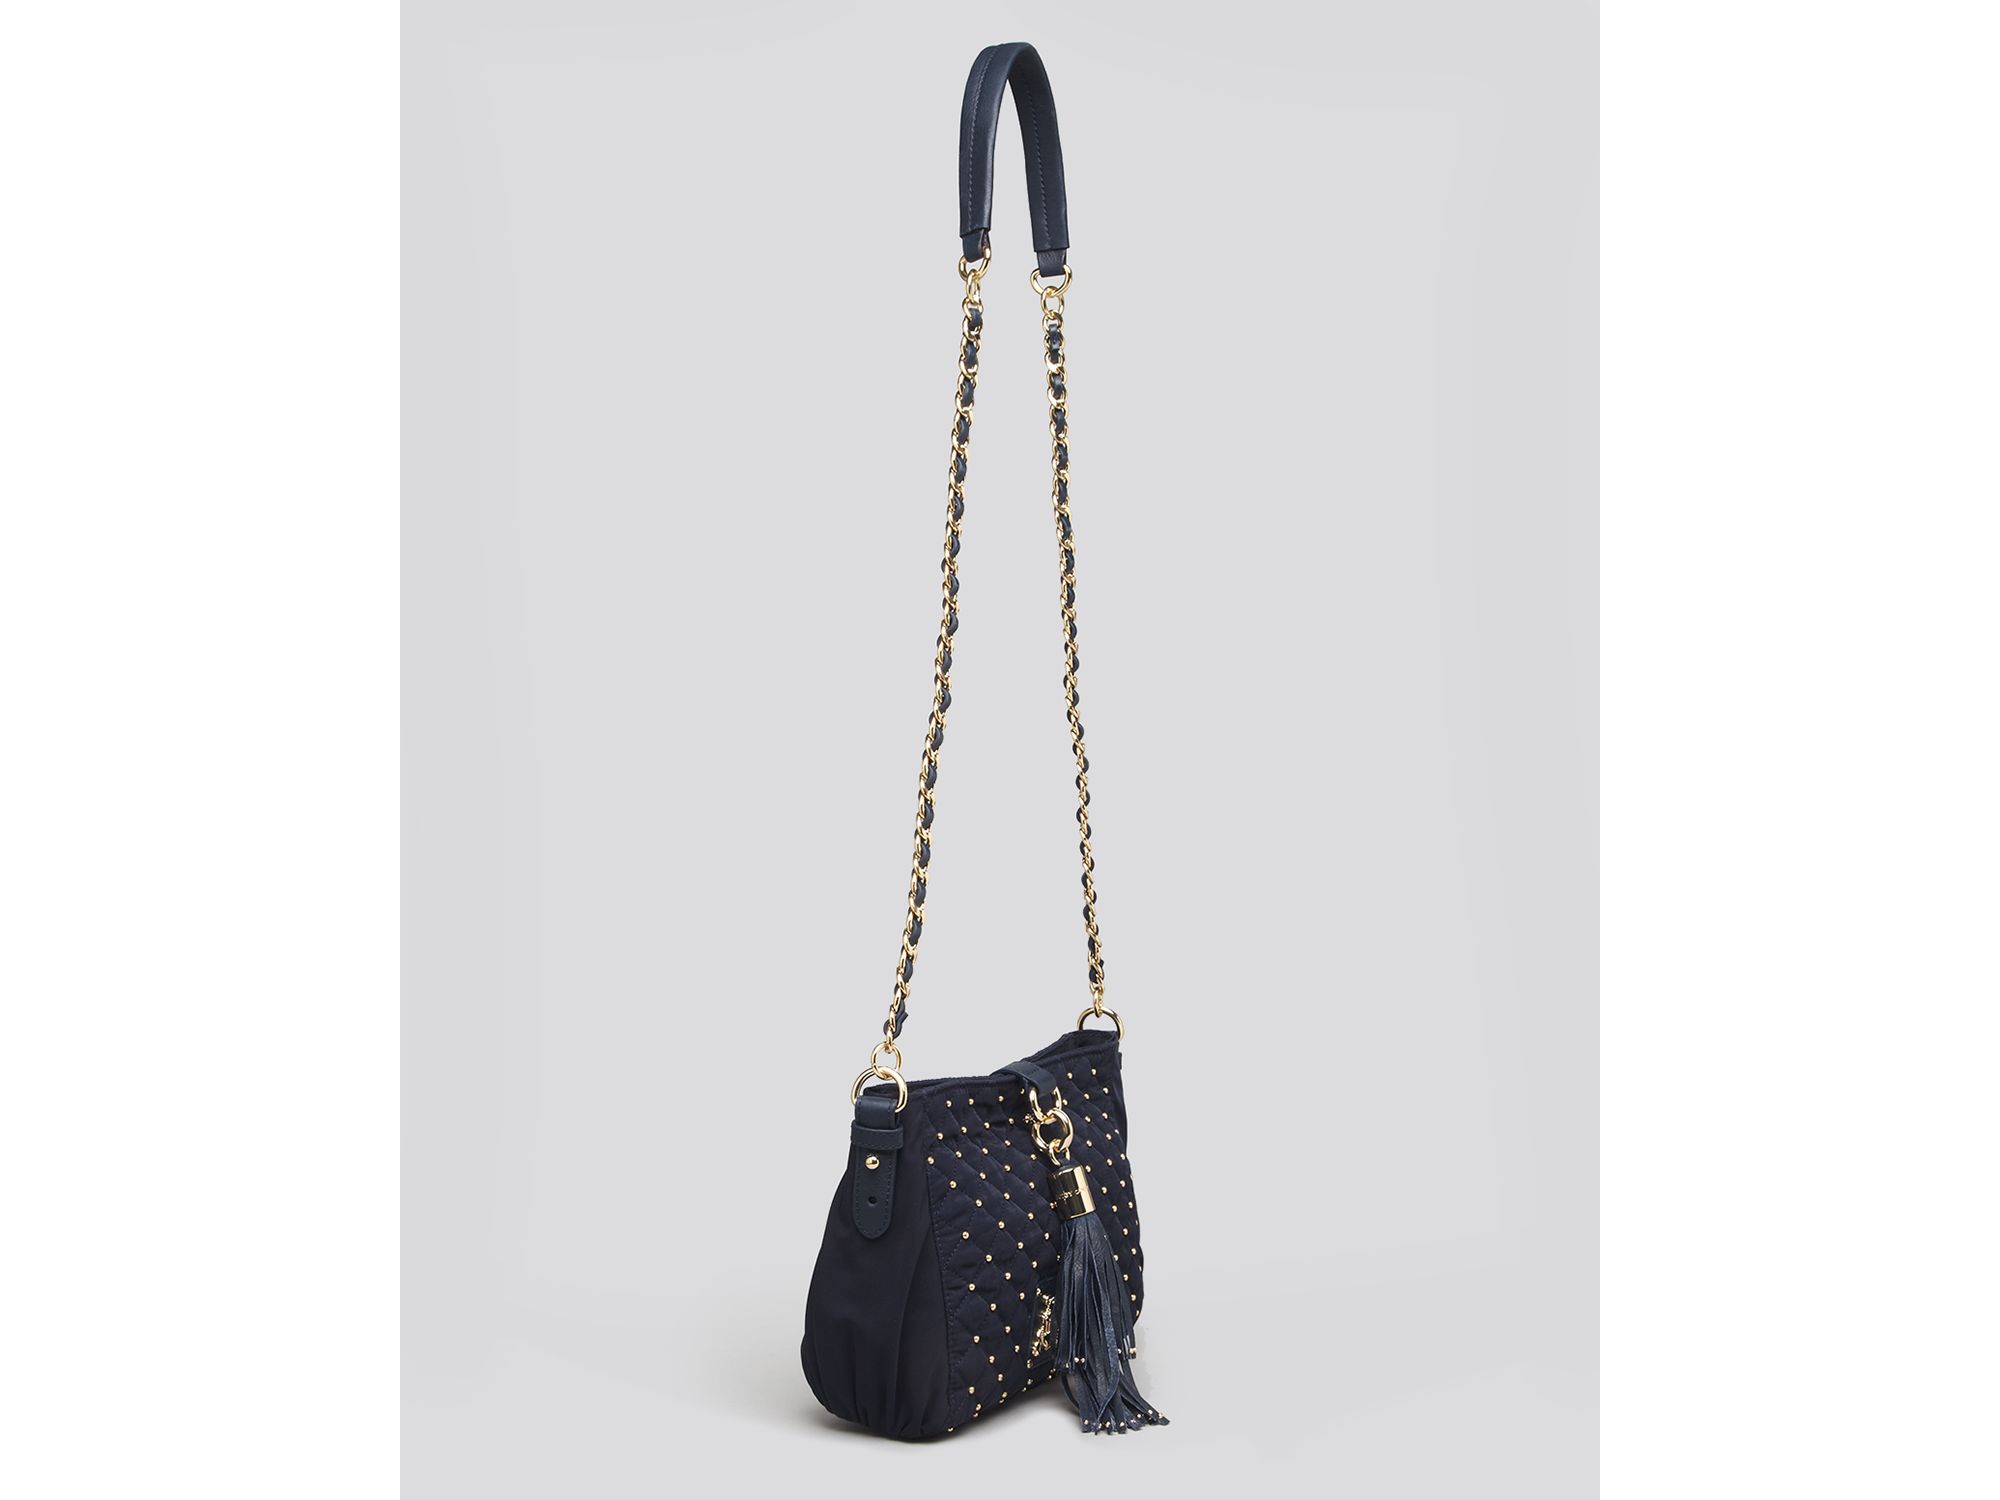 Lyst - Juicy couture Quilted Nylon Crossbody Bag in Blue